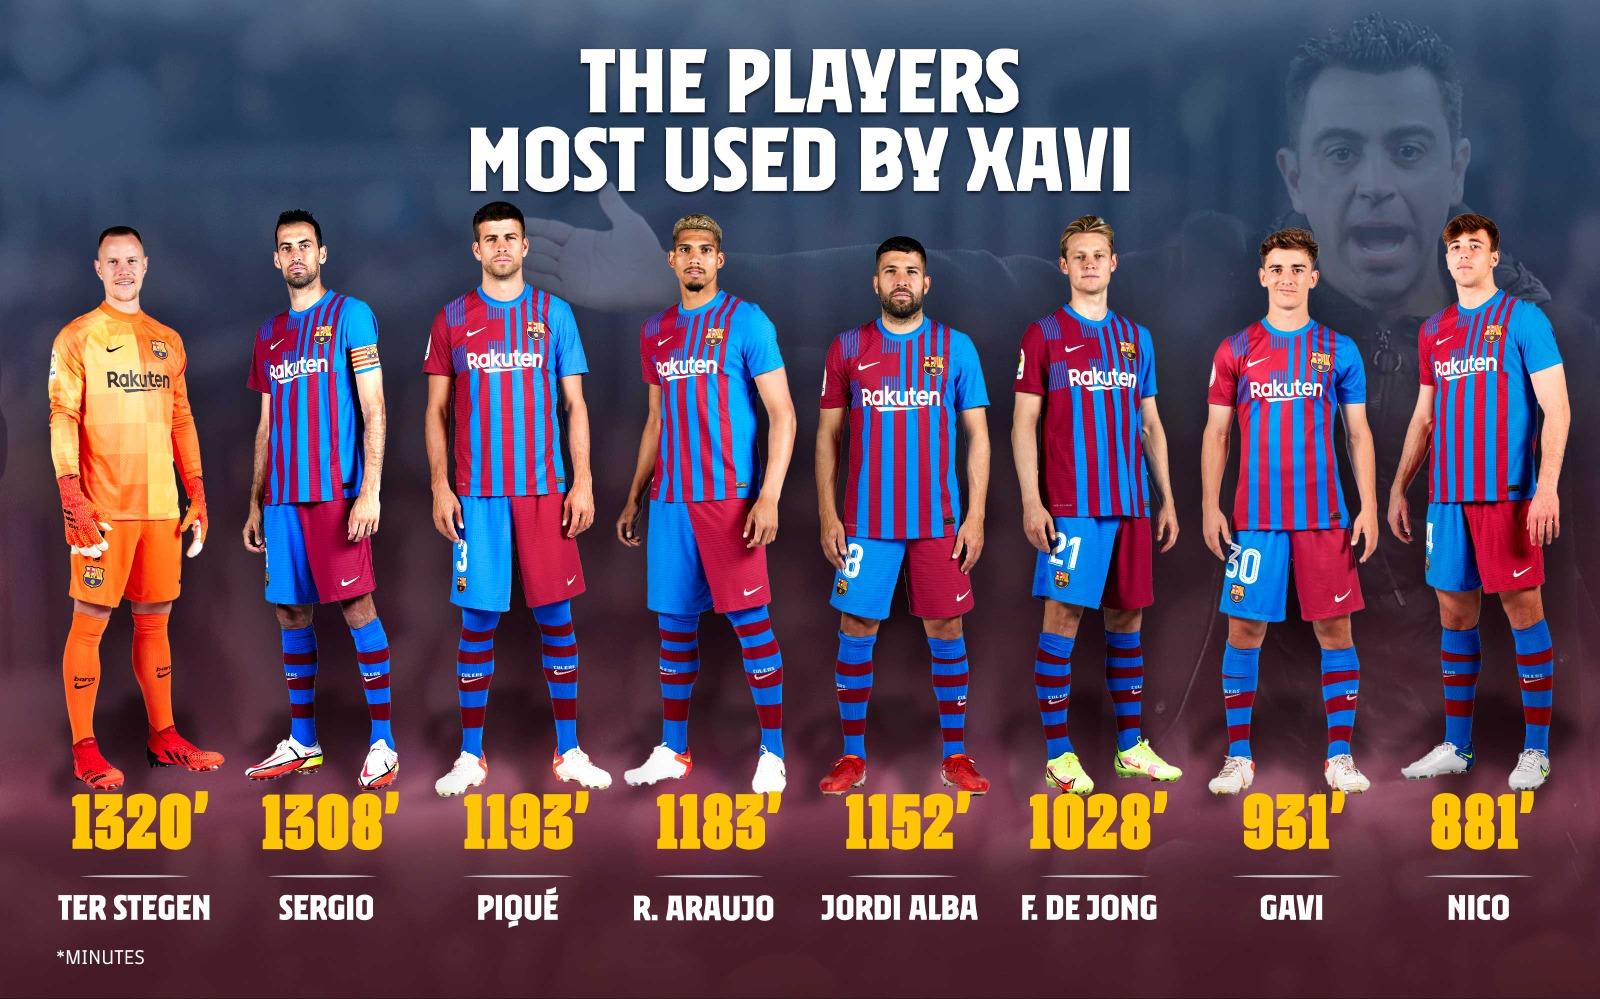 FC Barcelona on Xavis top minutes played leaders https